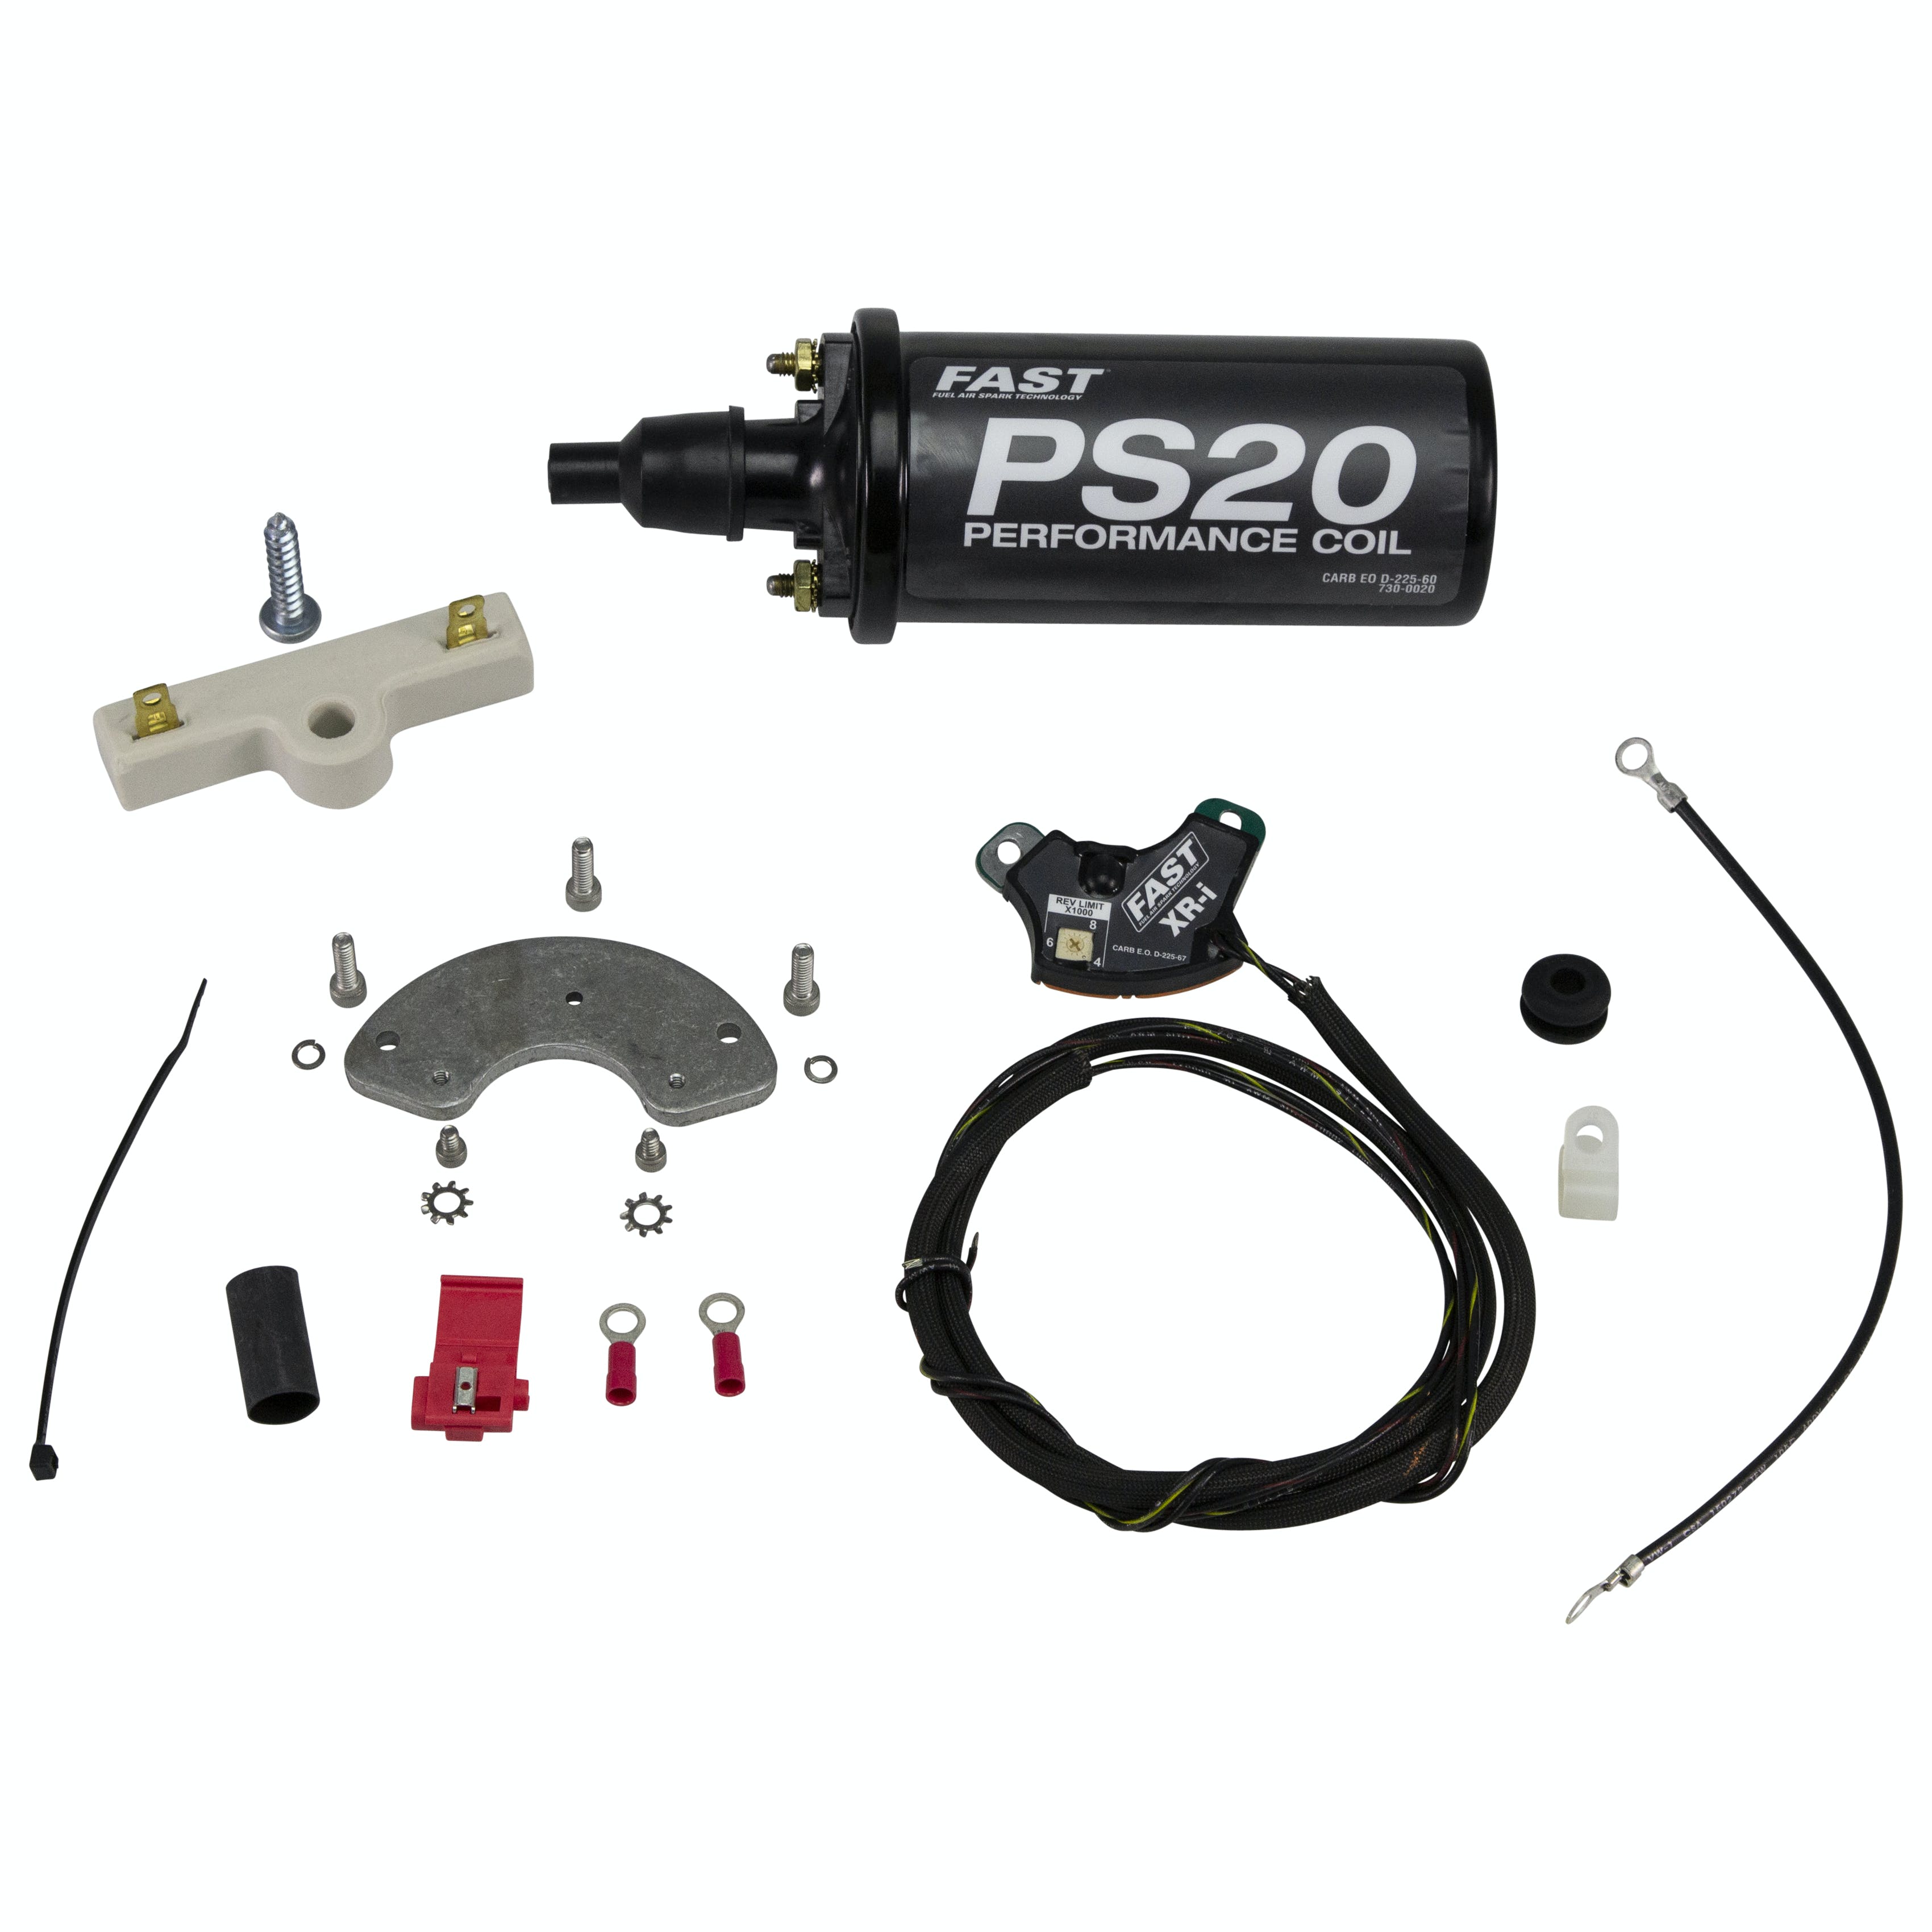 FAST - Fuel Air Spark Technology 750-1715 XR-I Points Replacement with PS20 Coil for Chevrolet from 1957 to 1974